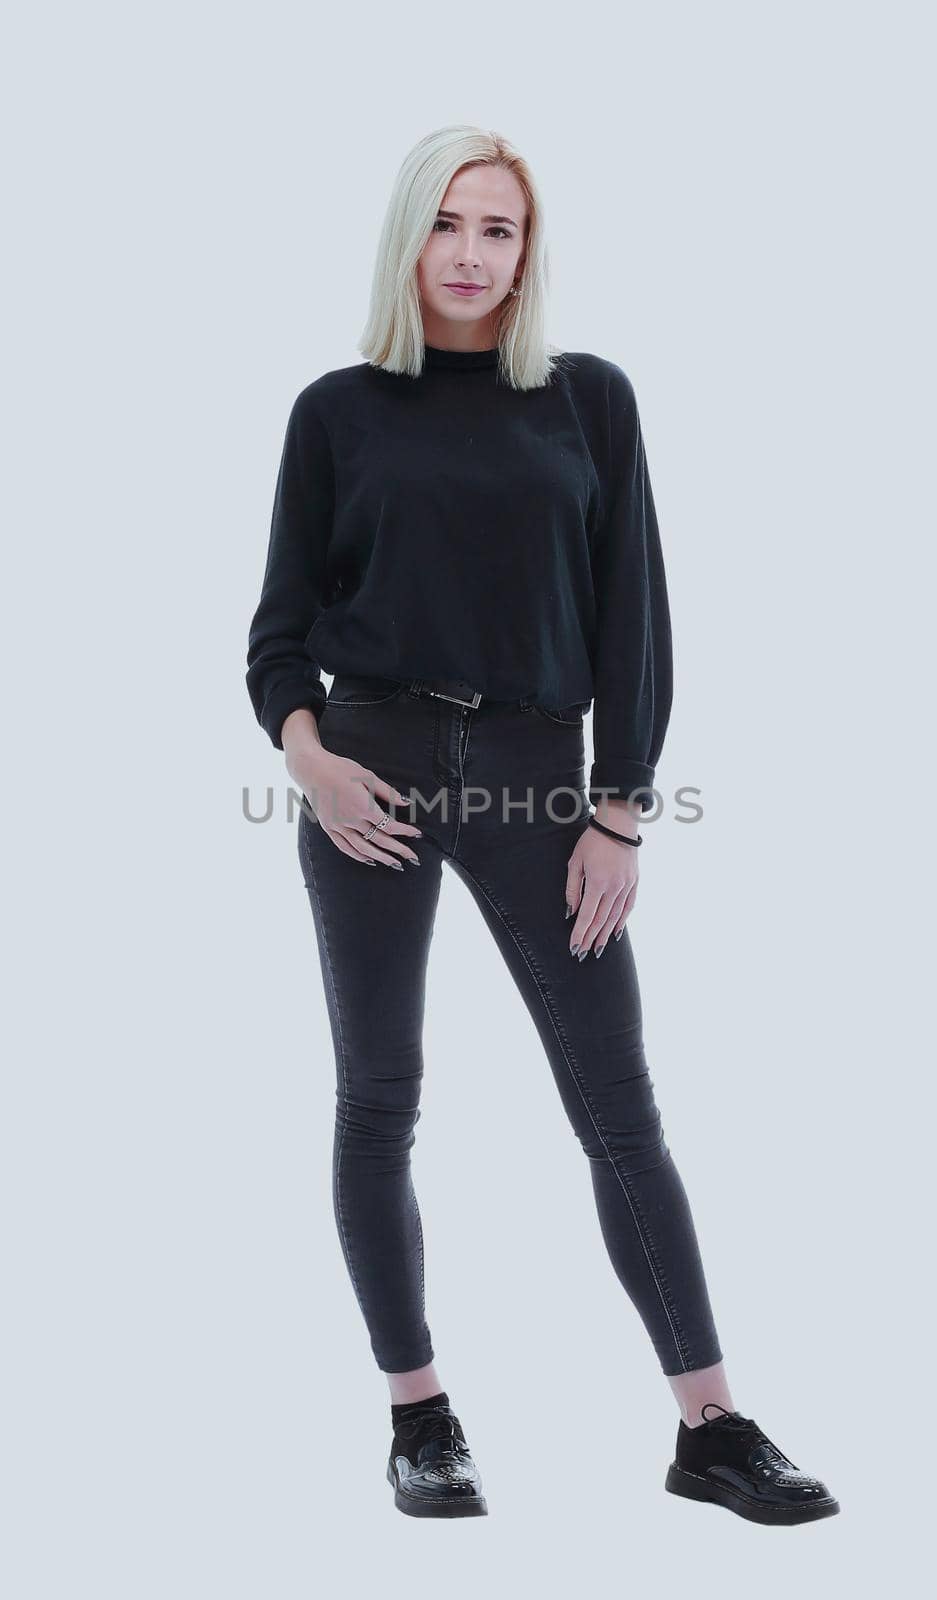 beautiful female model in jeans and black blouse by asdf